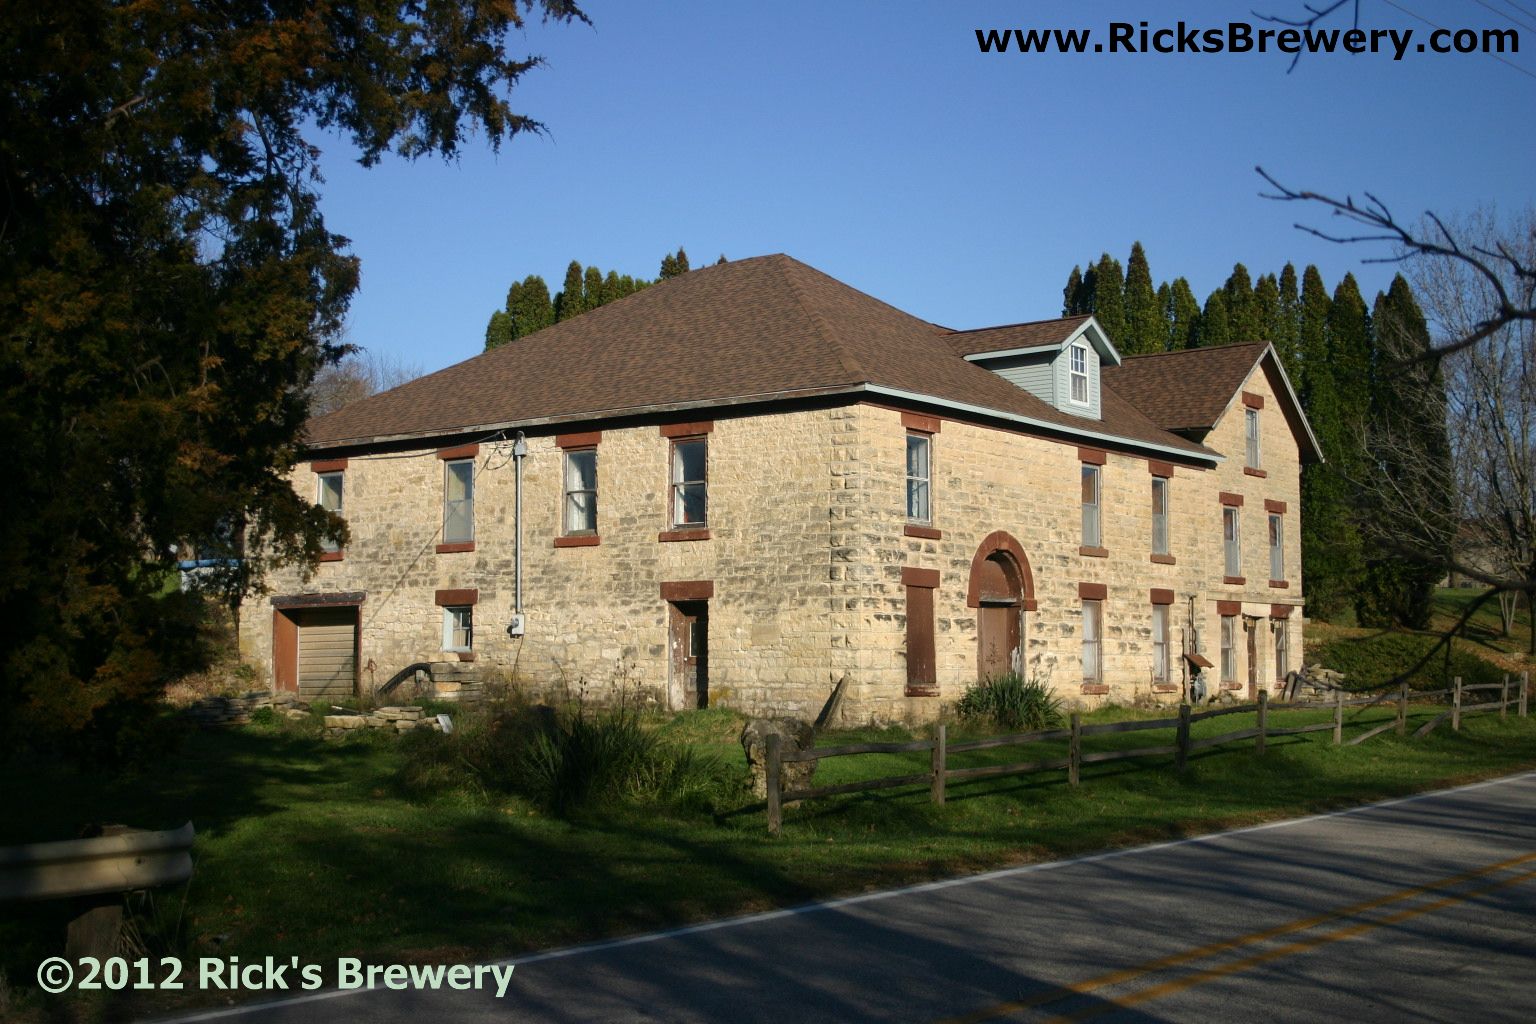 Rick's Brewery south west view